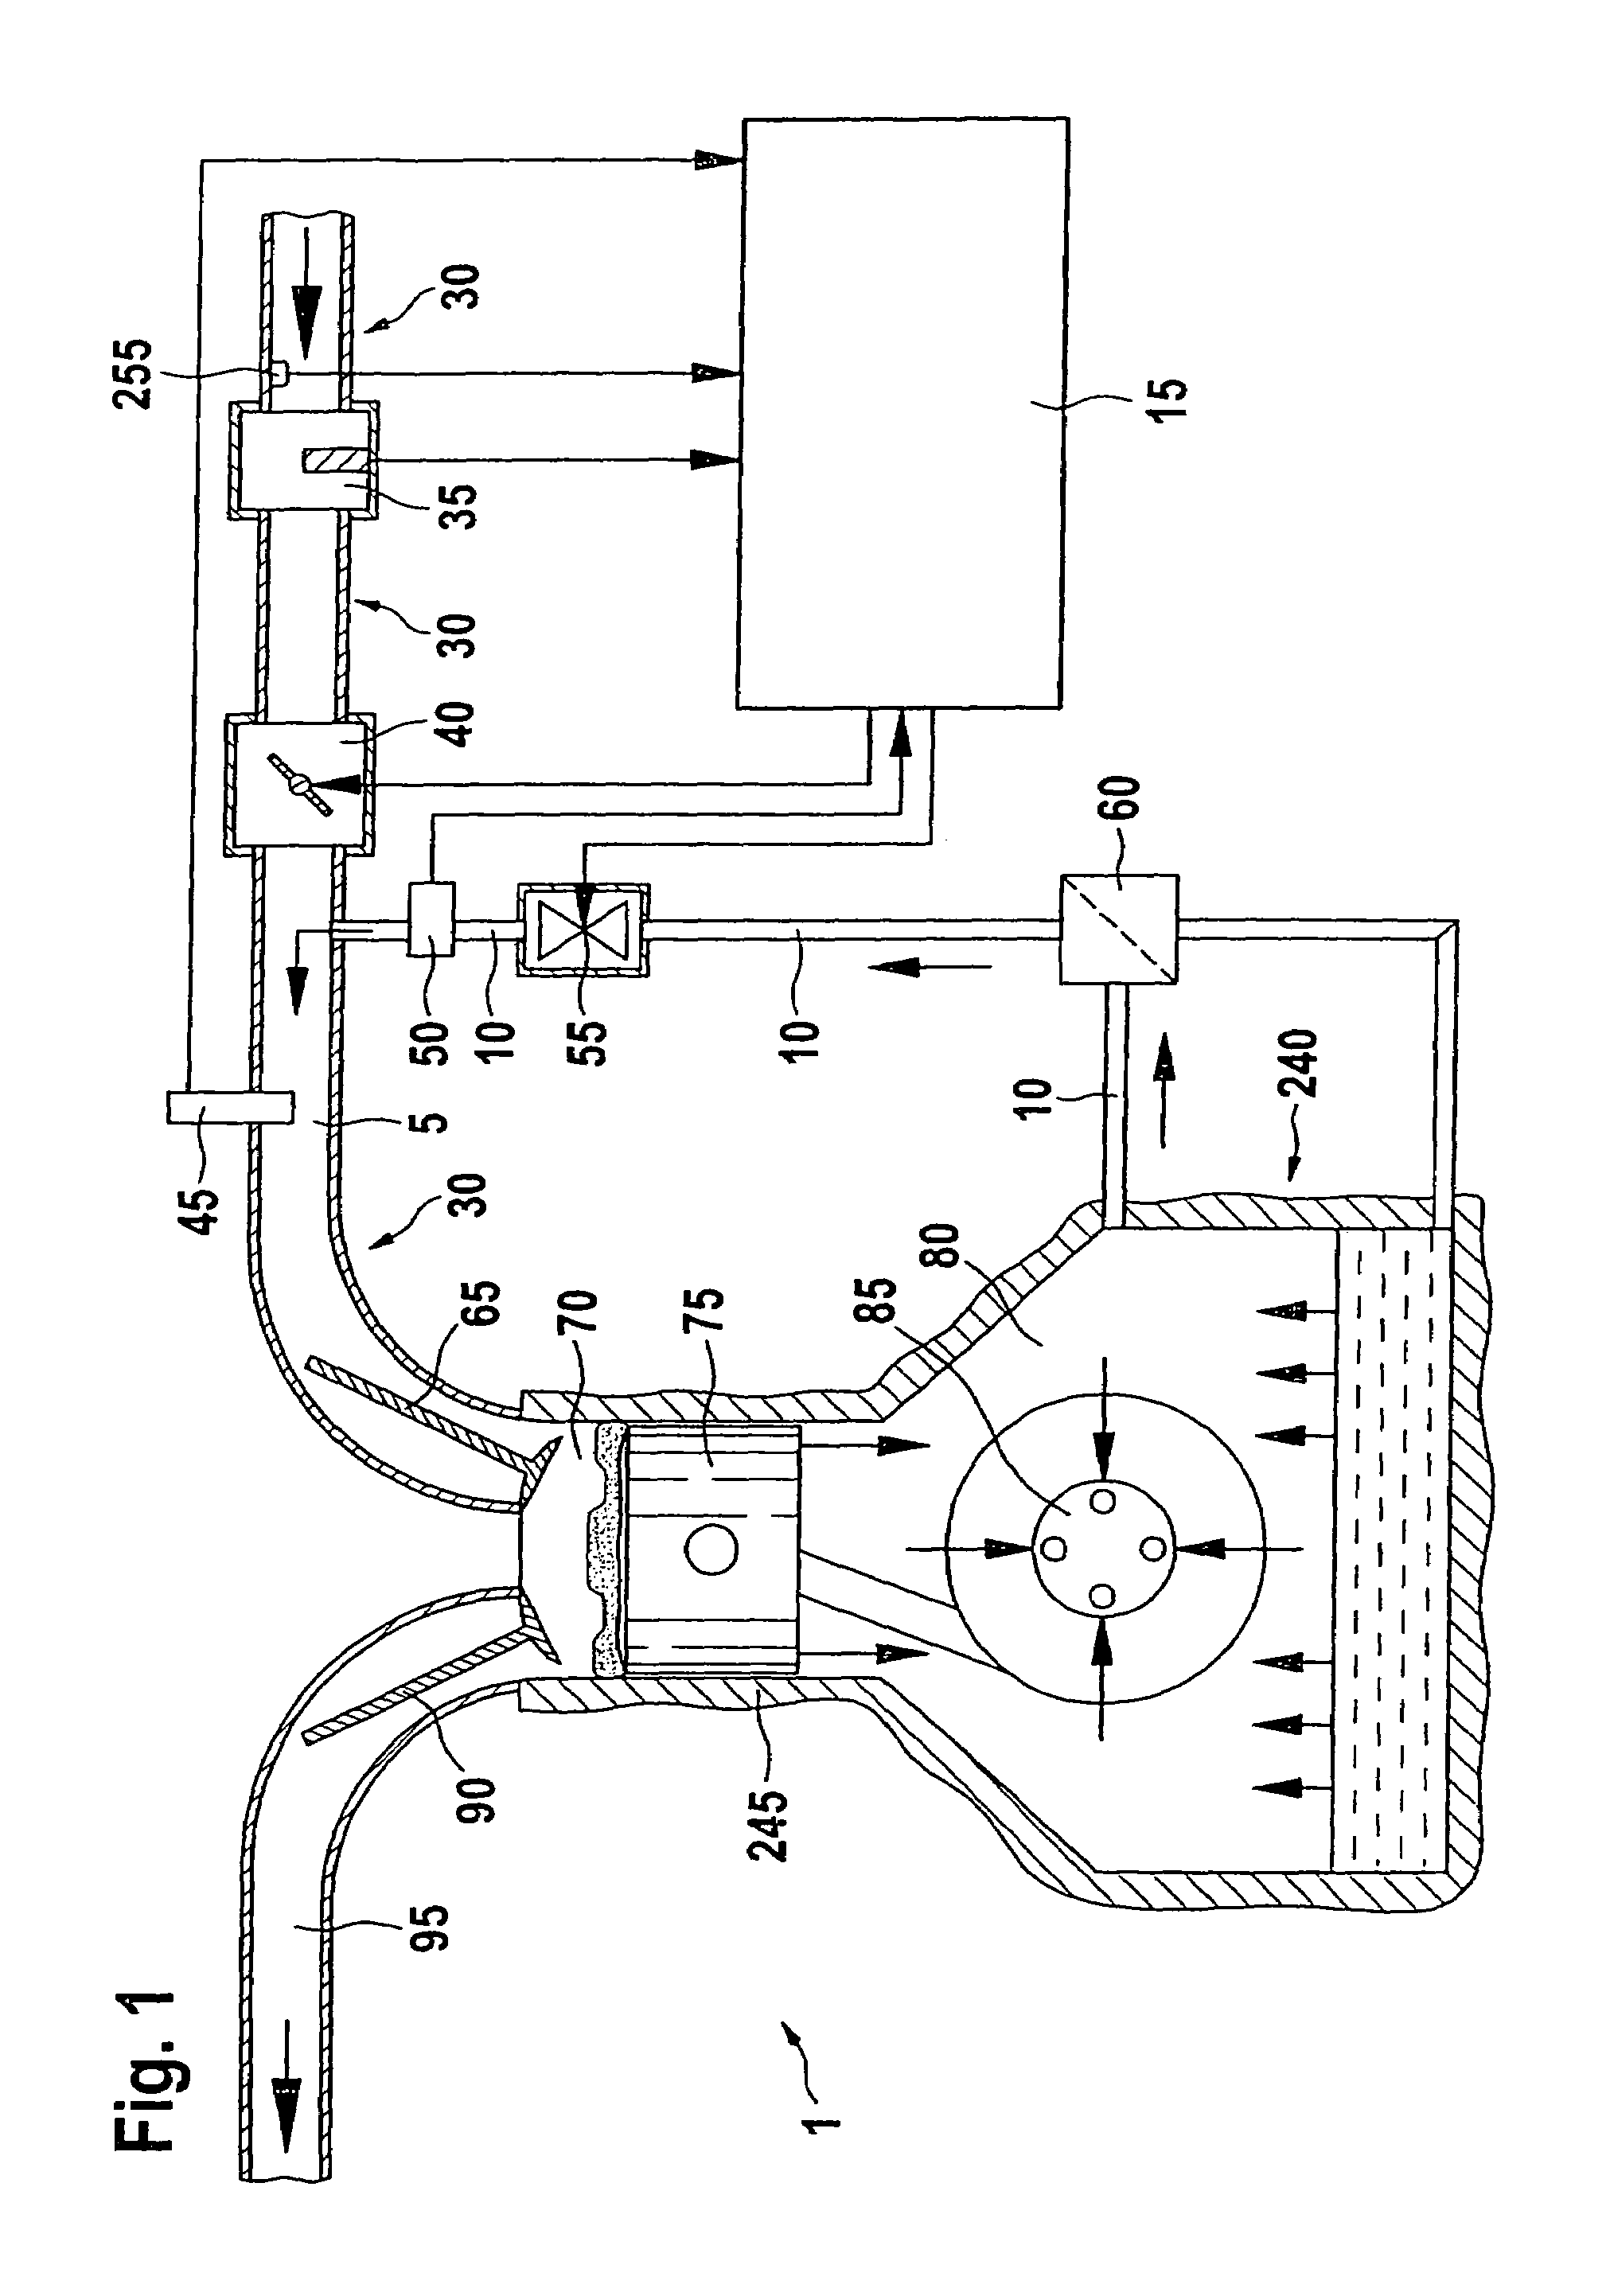 Method and device for operating an internal combustion engine